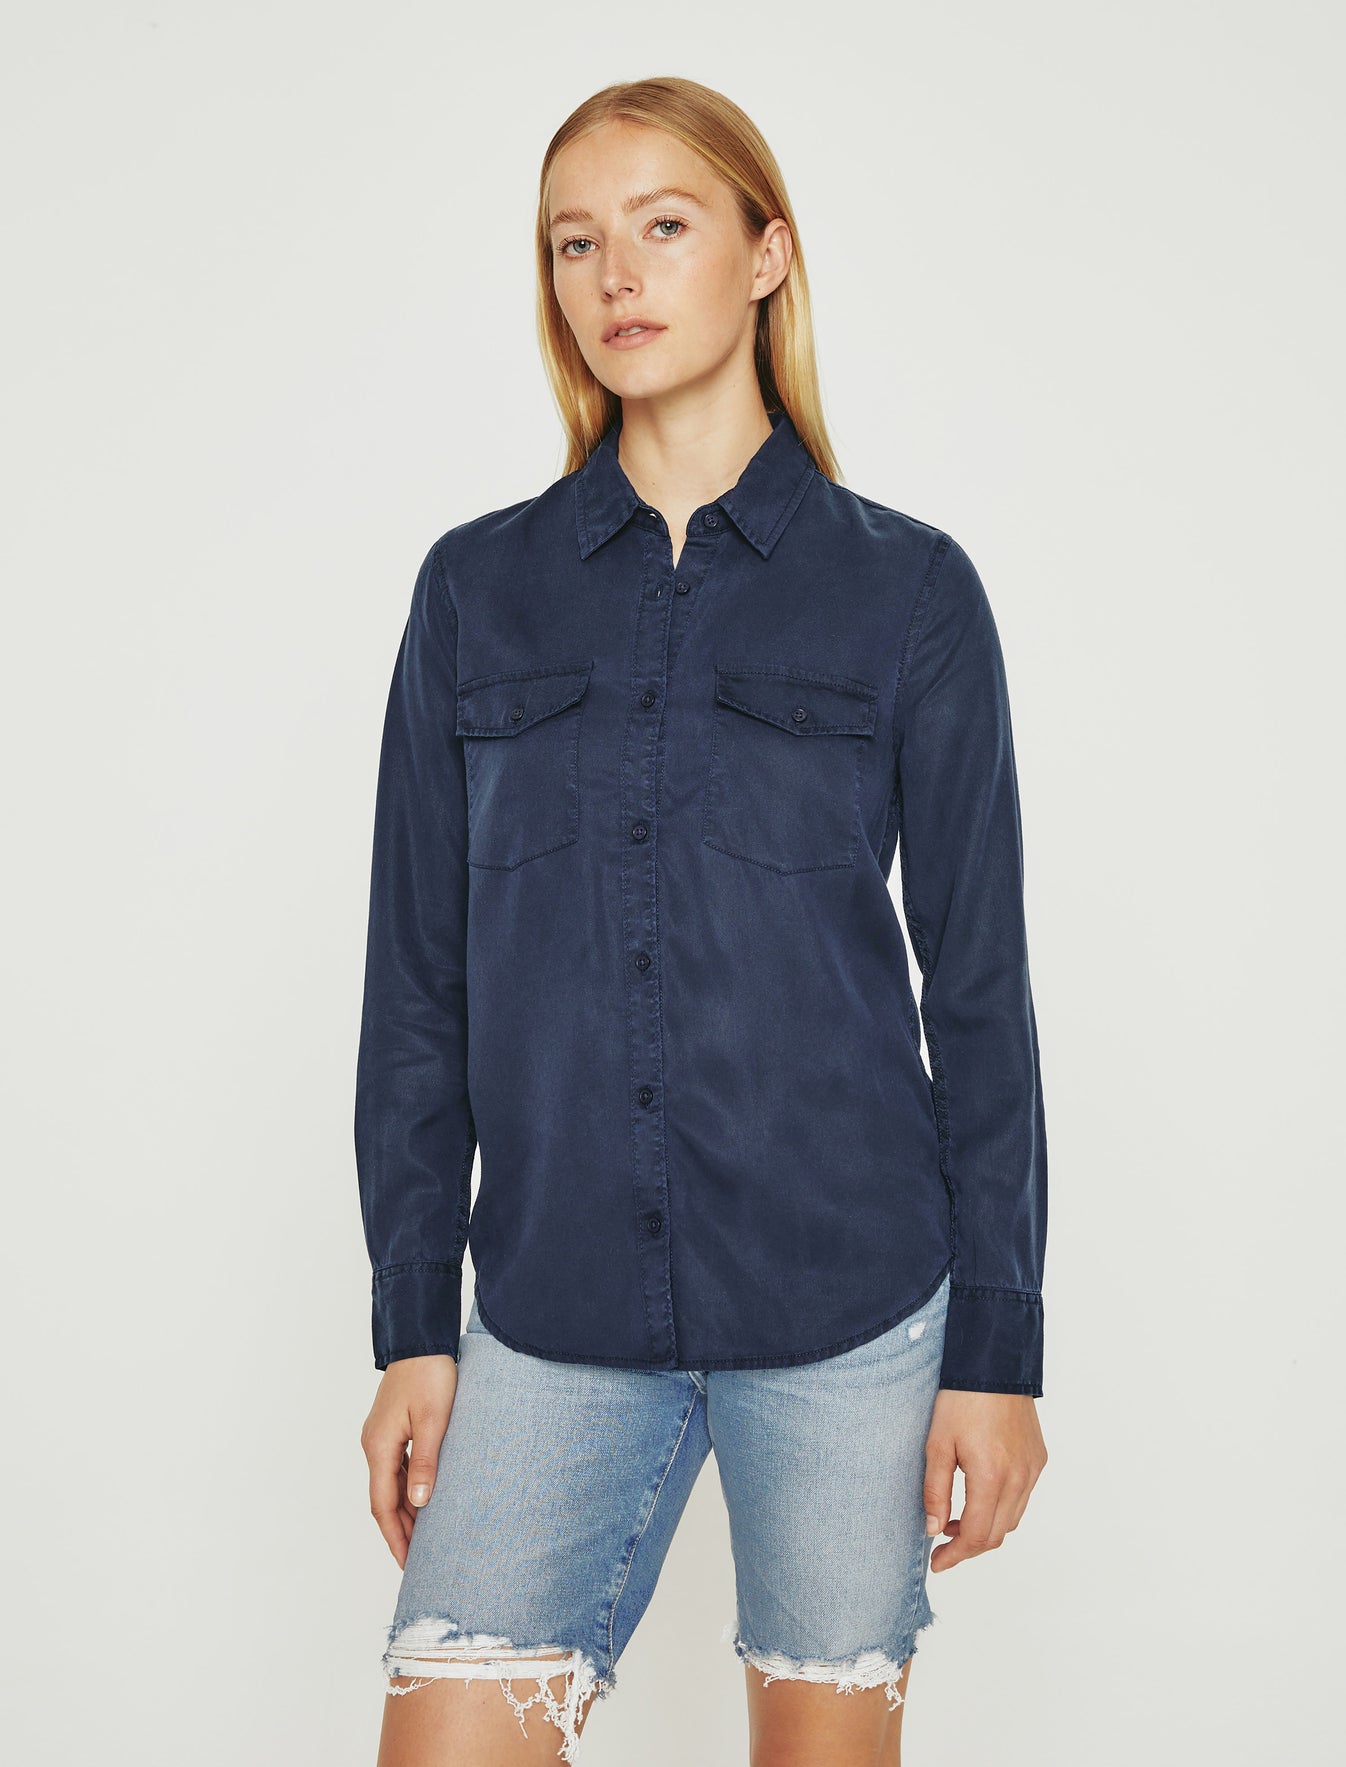 Shiela Utility|Relaxed Button Up